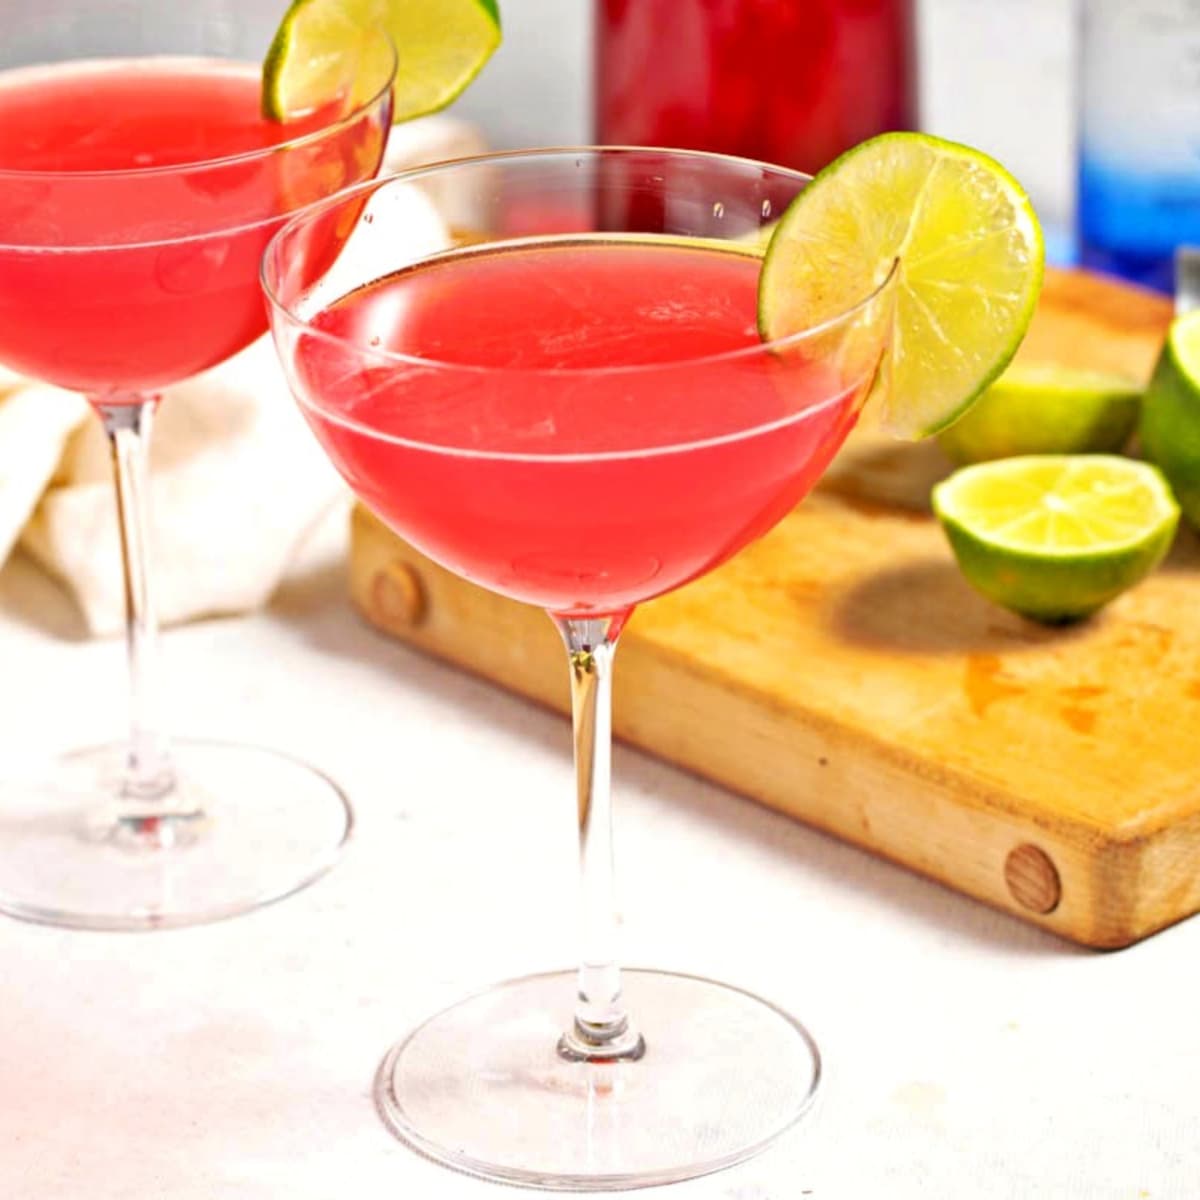 Two glasses of homemade cosmopolitan cocktail with limes on a cutting board in the background